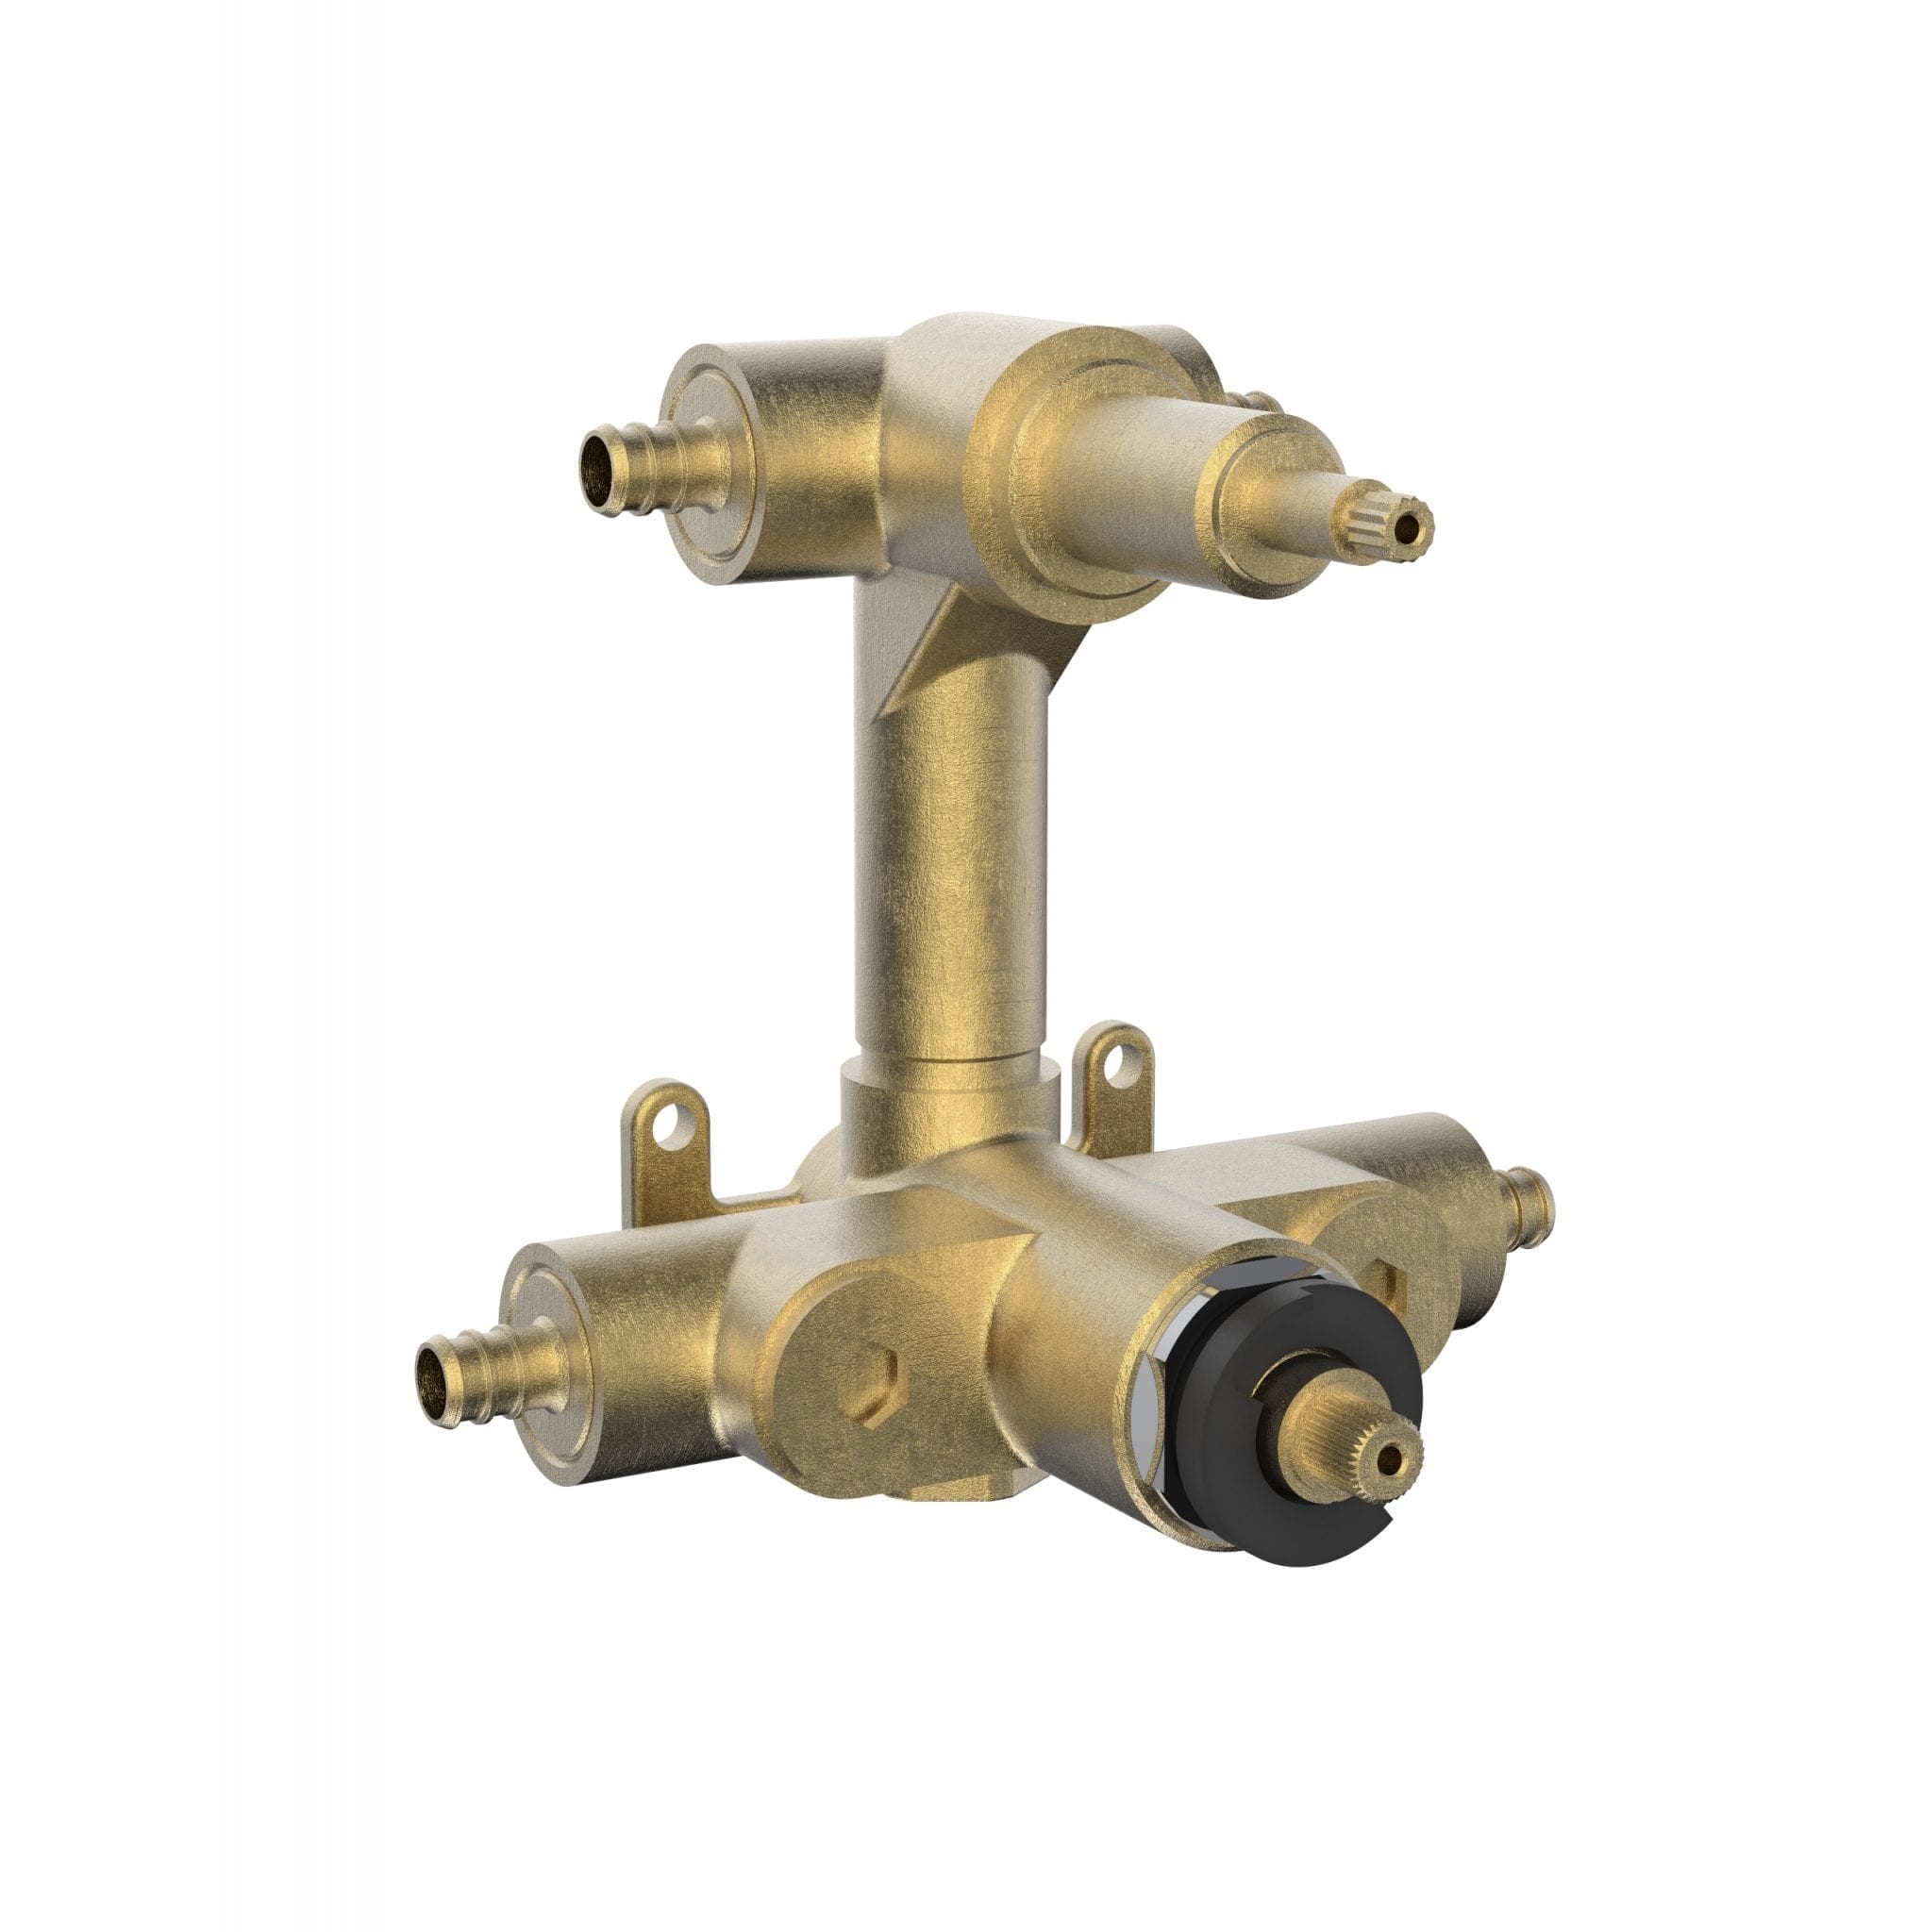 Bélanger 98TSR2PEX- 2-Way Diverter Thermo Valve Rough-In For Pex Connection W/Check Stops